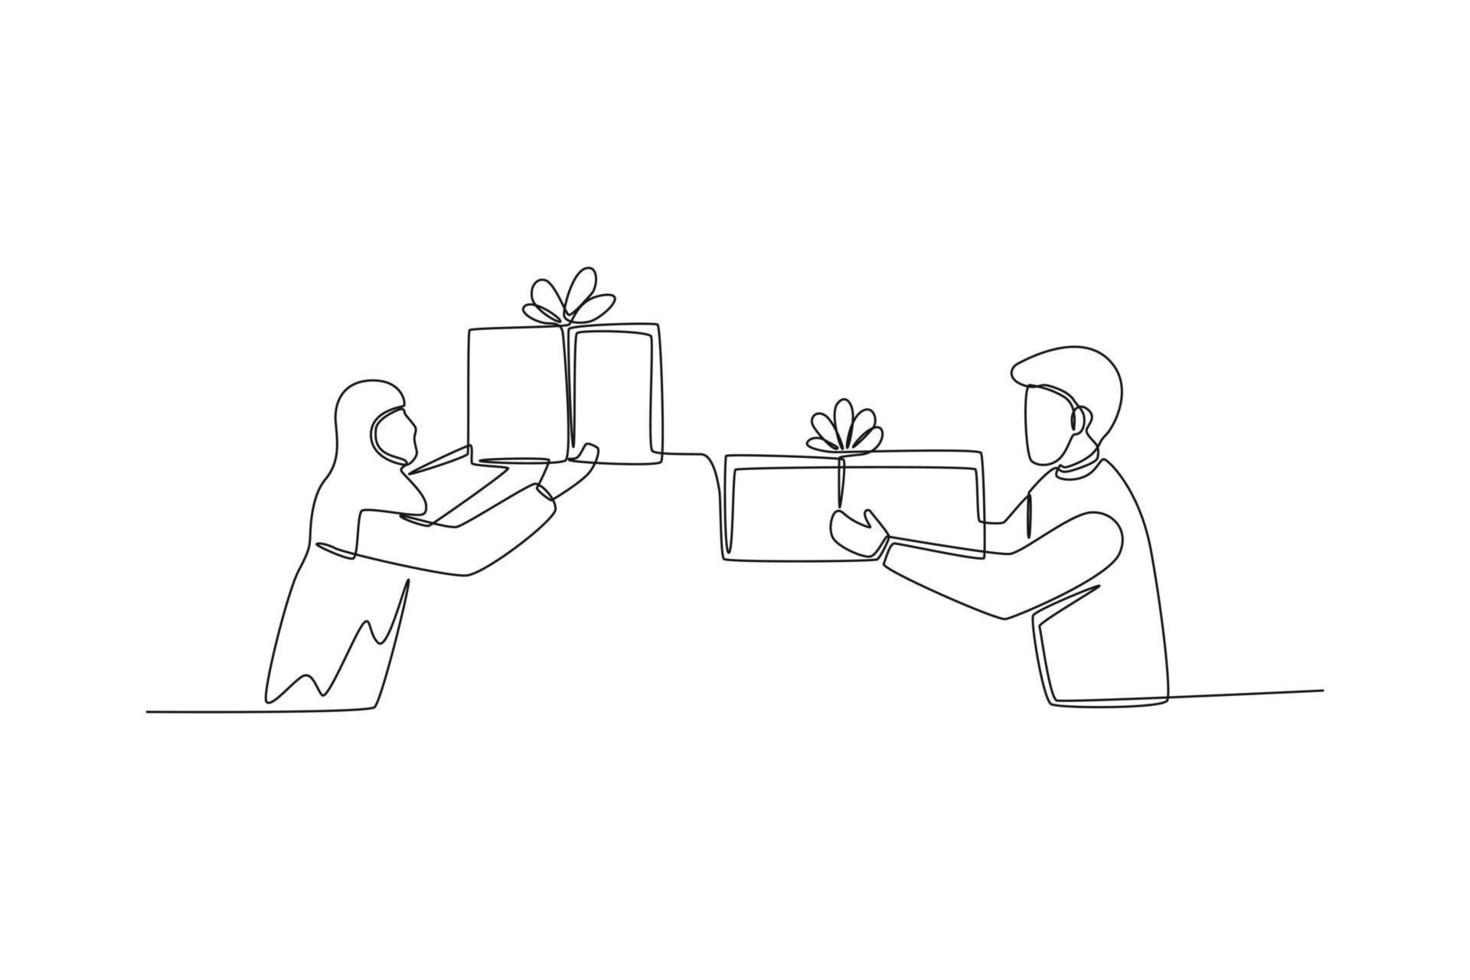 Single one line drawing Muslim couple holding gift boxes and giving each other. gift box concept. Continuous line draw design graphic vector illustration.